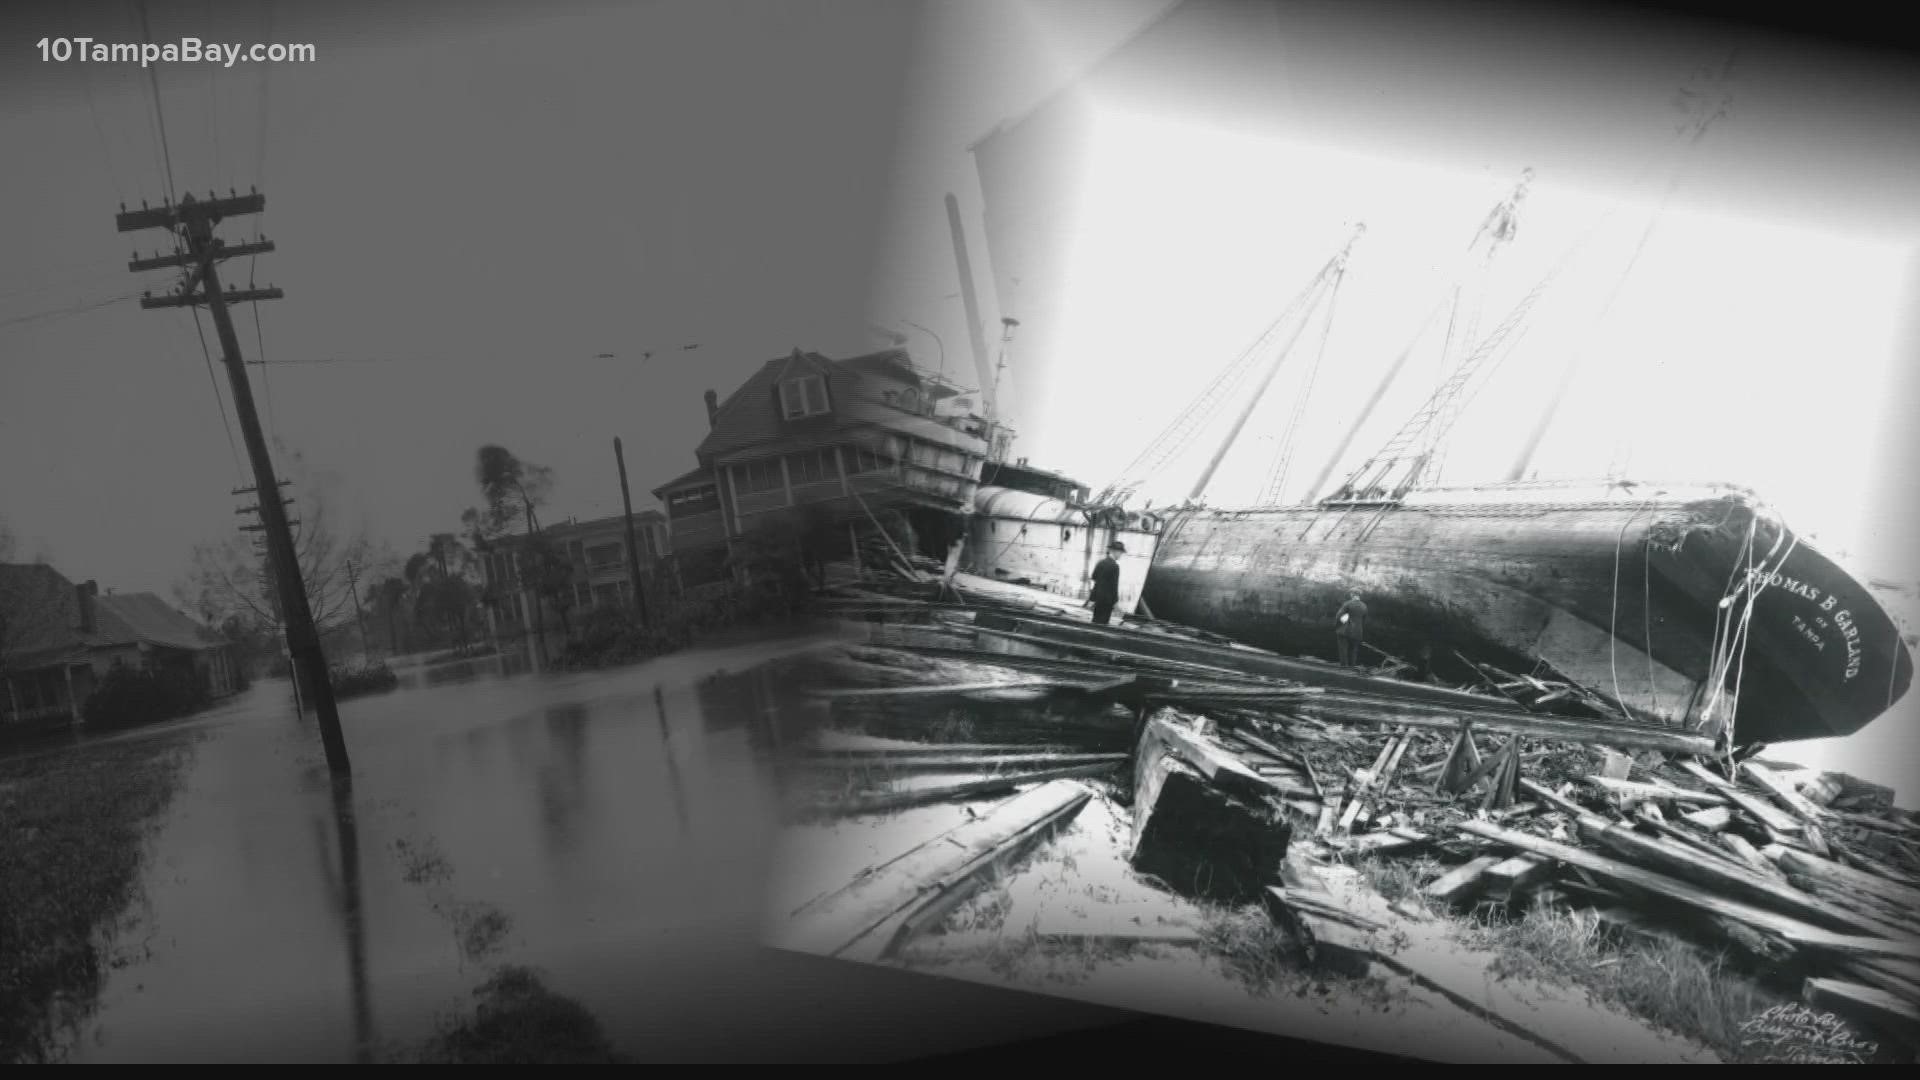 Eight people died in the Category 4 storm that split Hog Island on October 25, 1921. The storm carved out 'Hurricane Pass', creating Caladesi and Honeymoon Islands.